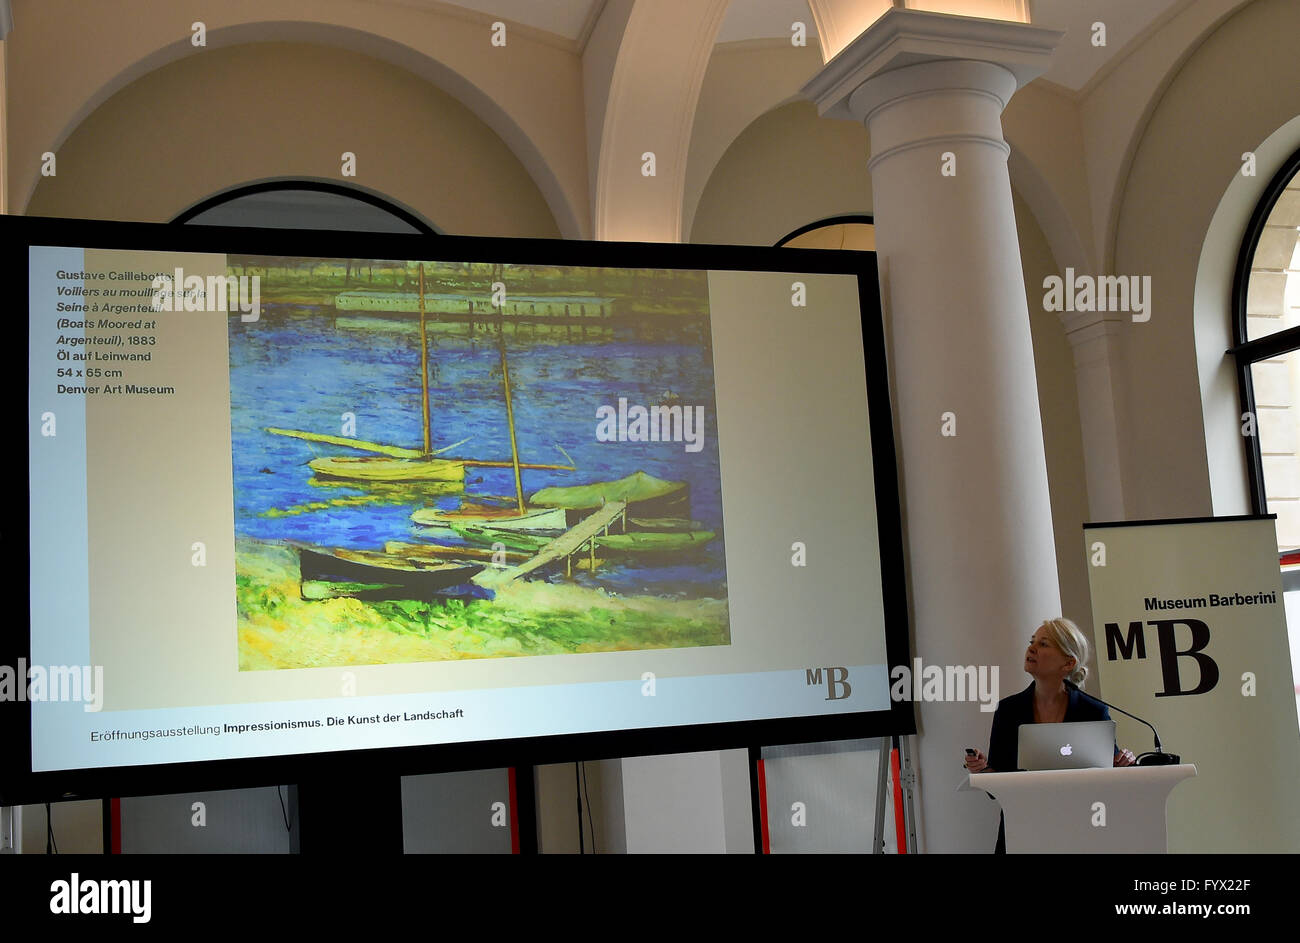 Museum director Ortrud Westheider presents the concept of the first exhibitions to be held in the Barberini Museum scheduled to open in January 2017, with a projection of a painting by Gustave Caillebotte pictured next to her, in the lobby of the future museum in Potsdam, Germany, 28 April 2016. Photo: BERND SETTNIK/dpa Stock Photo